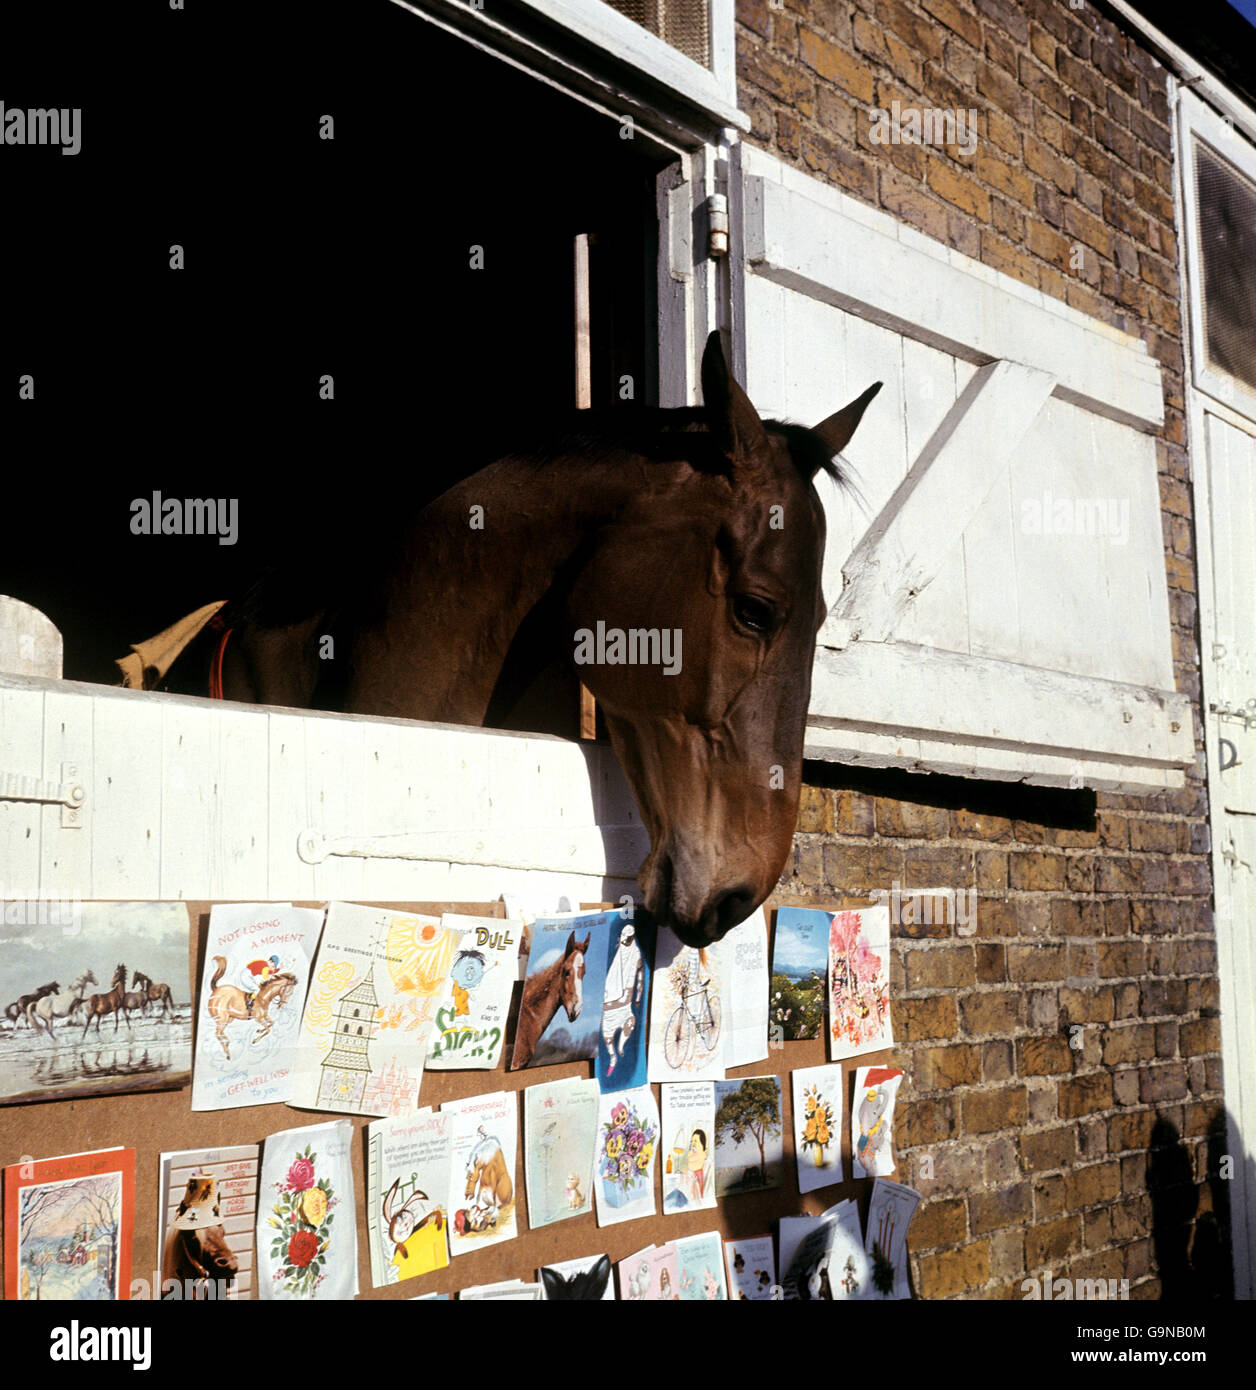 Arkle recovers from a fractured bone in the leg, with some of the 'get well soon' cards received at Kempton Stock Photo